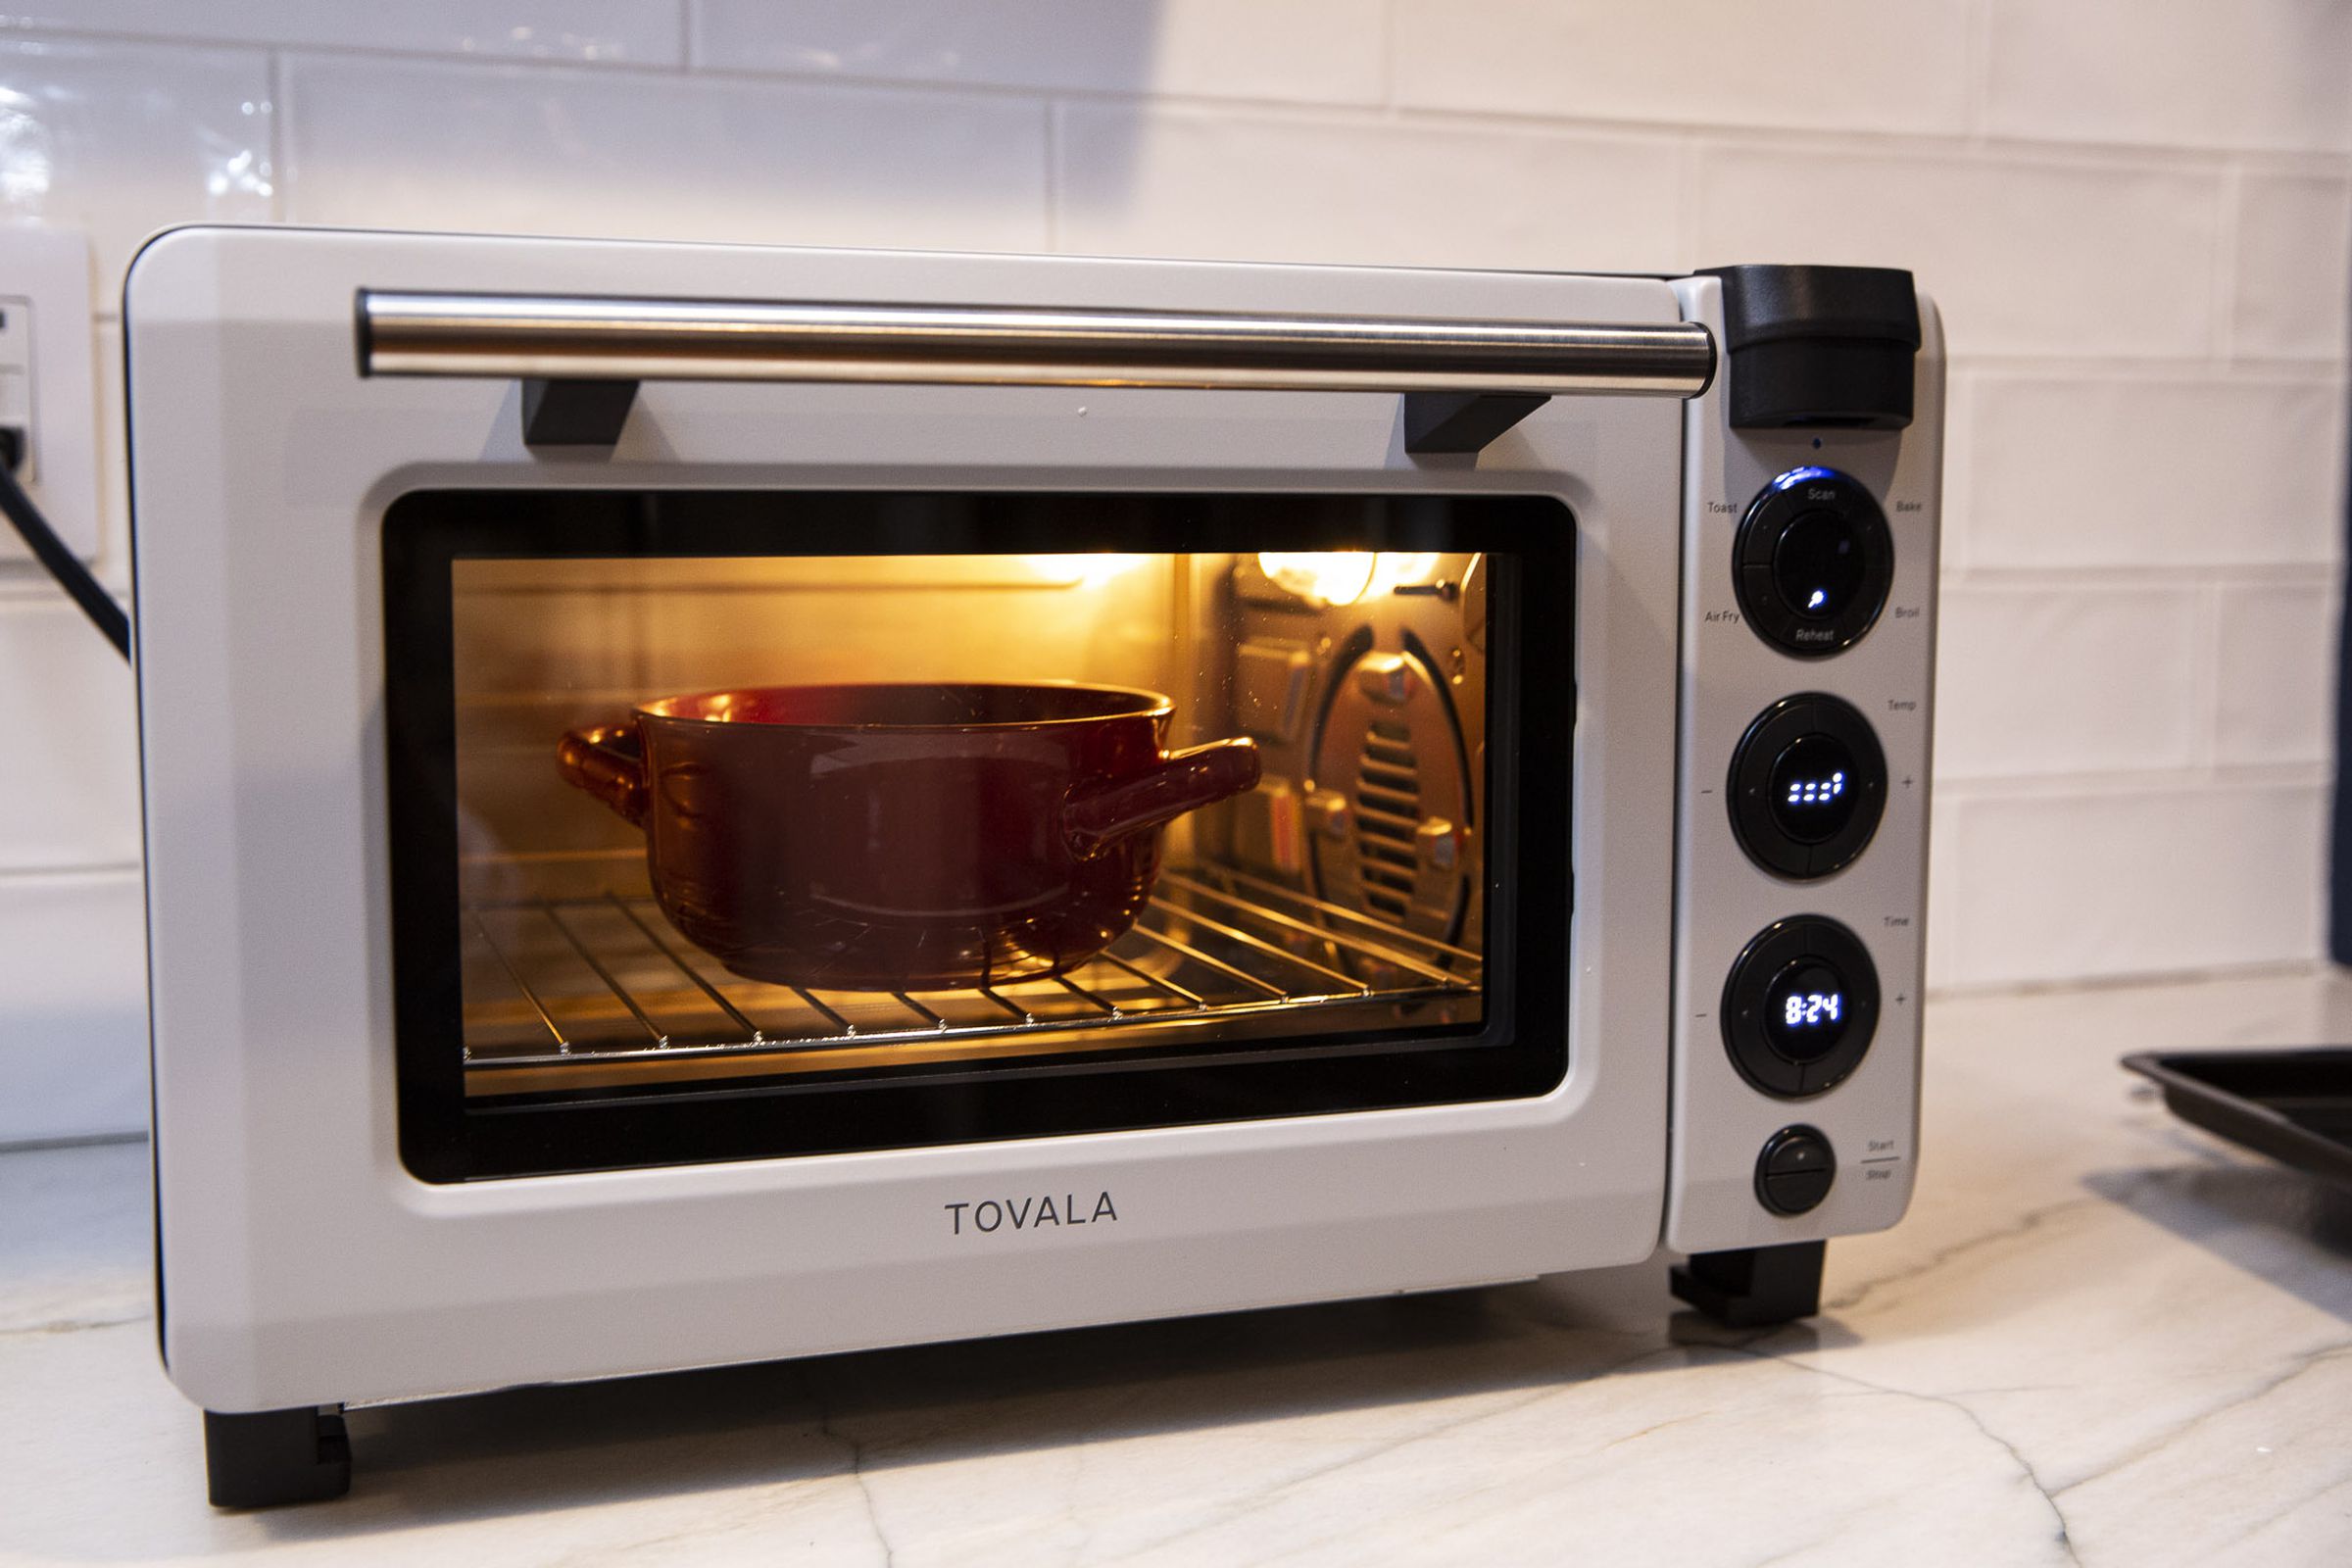 The Tovala Oven has simple, easy-to-use physical controls and a very handy reheat button.